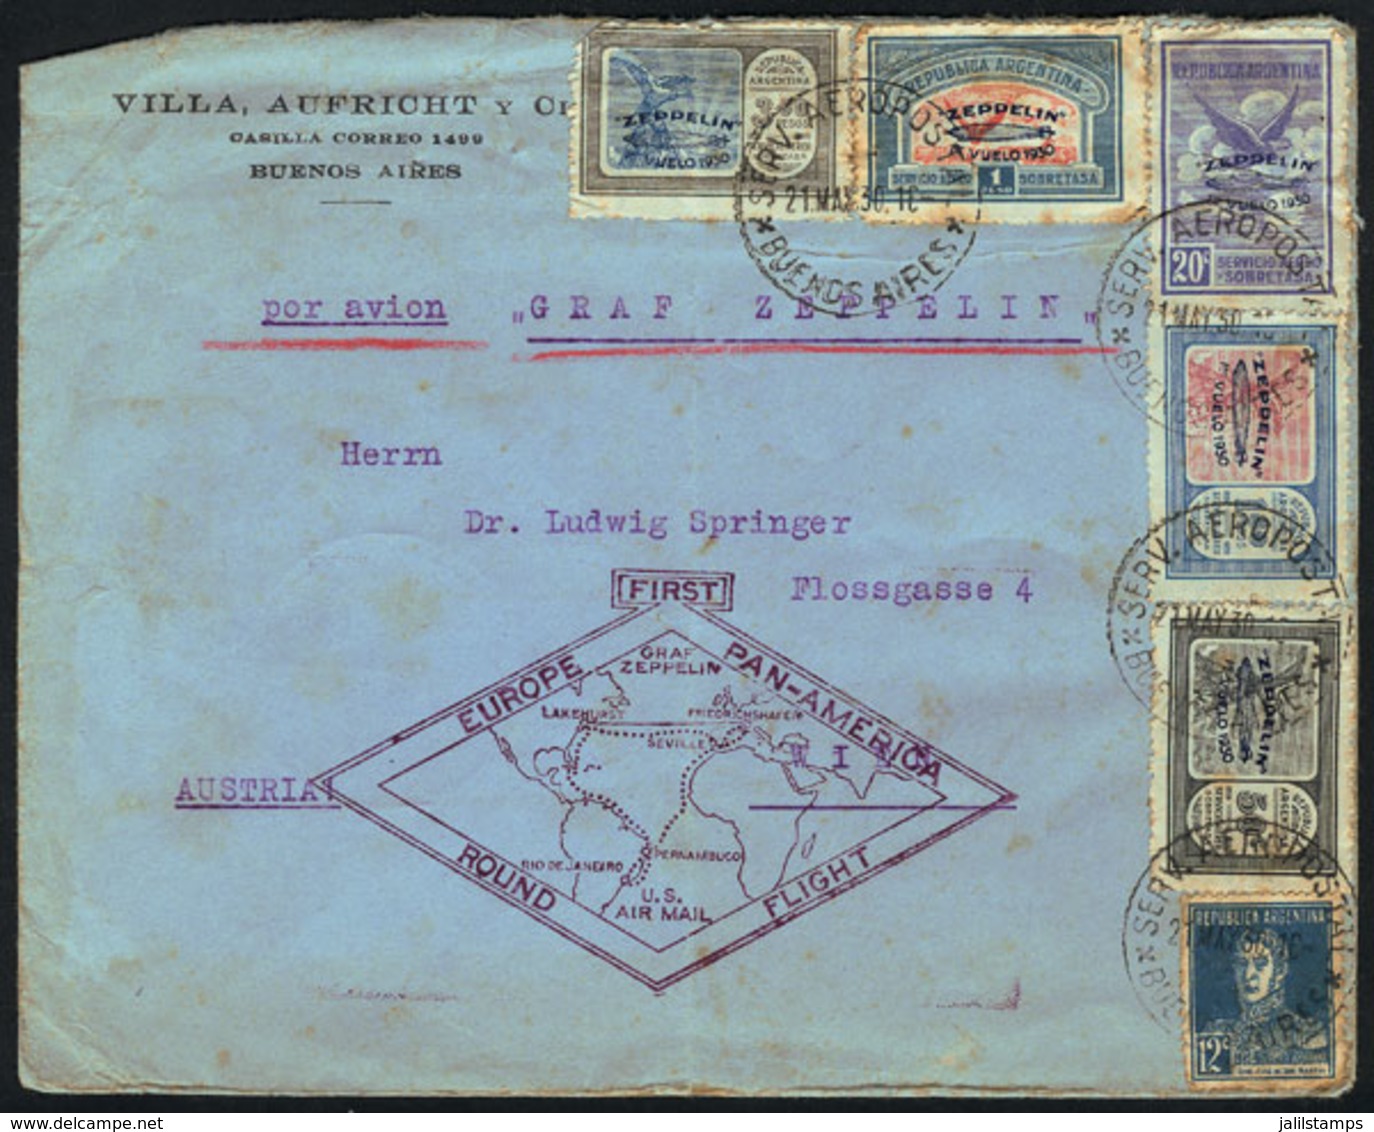 ARGENTINA: GJ.660/664, 1930 Zeppelin, Cmpl. Set Of 5 Values With Blue Overprint Used On A Cover Flown By Zeppelin To Aus - Posta Aerea